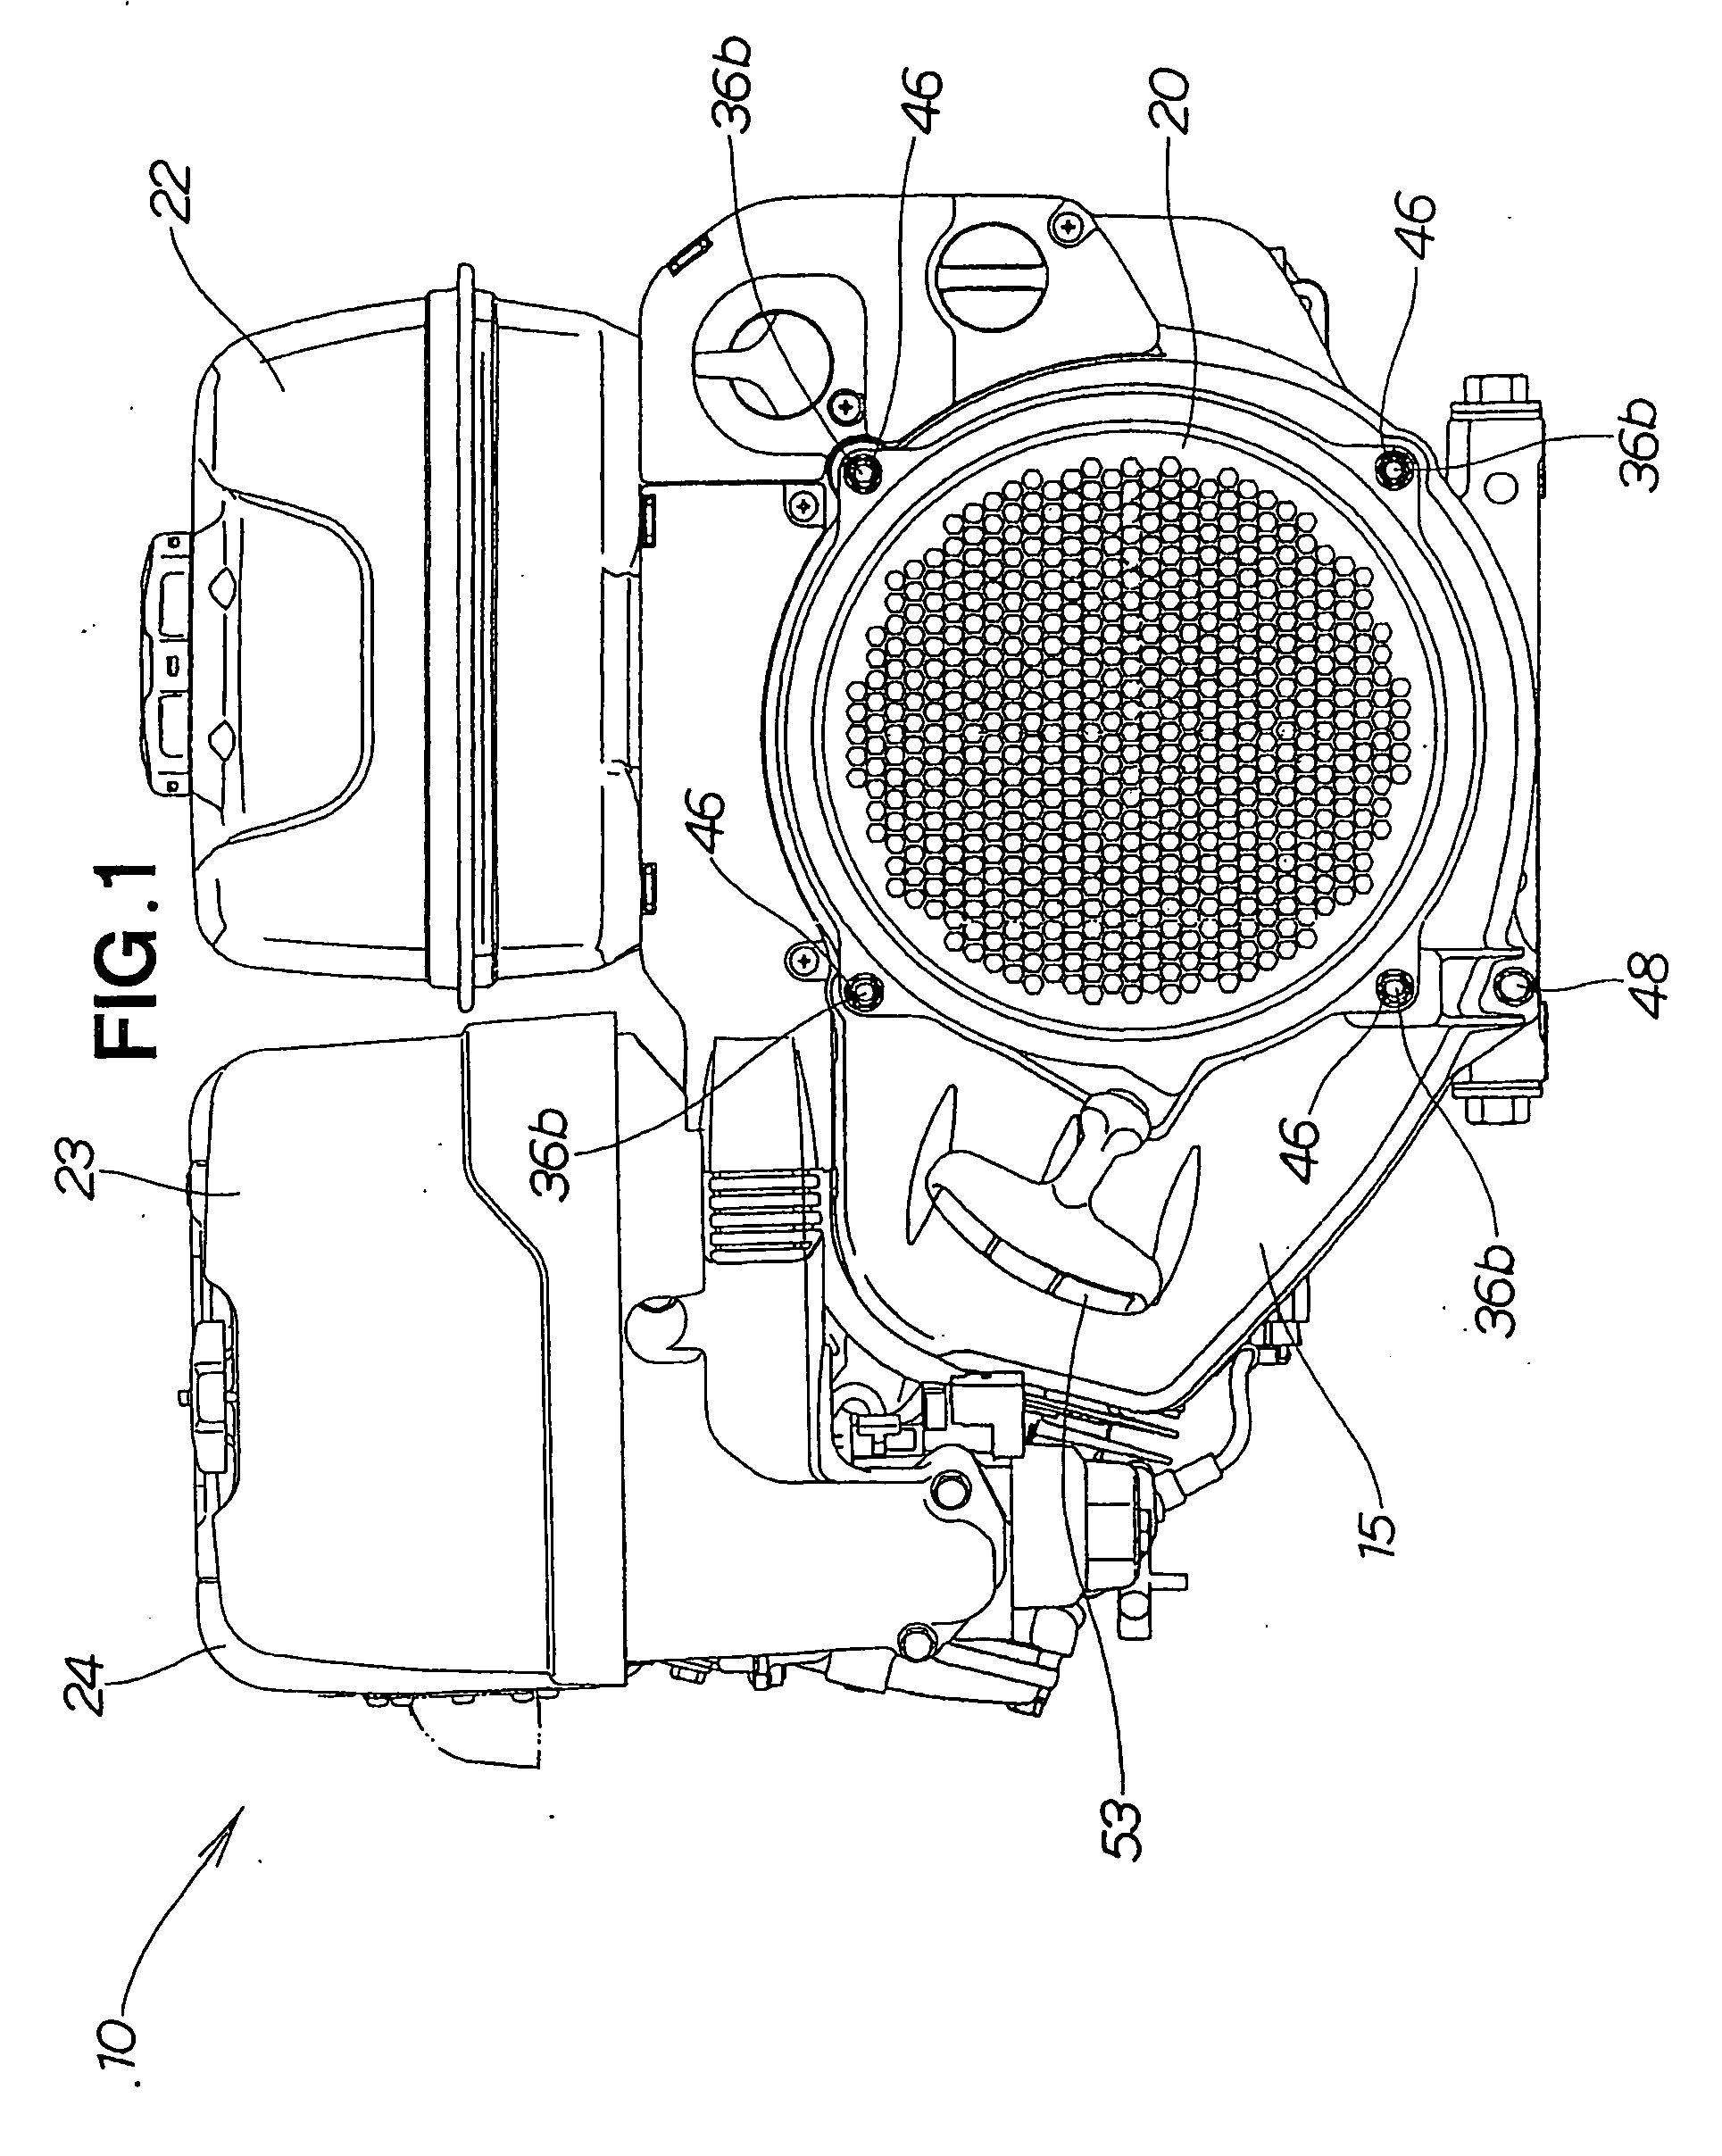 Air-cooled engine